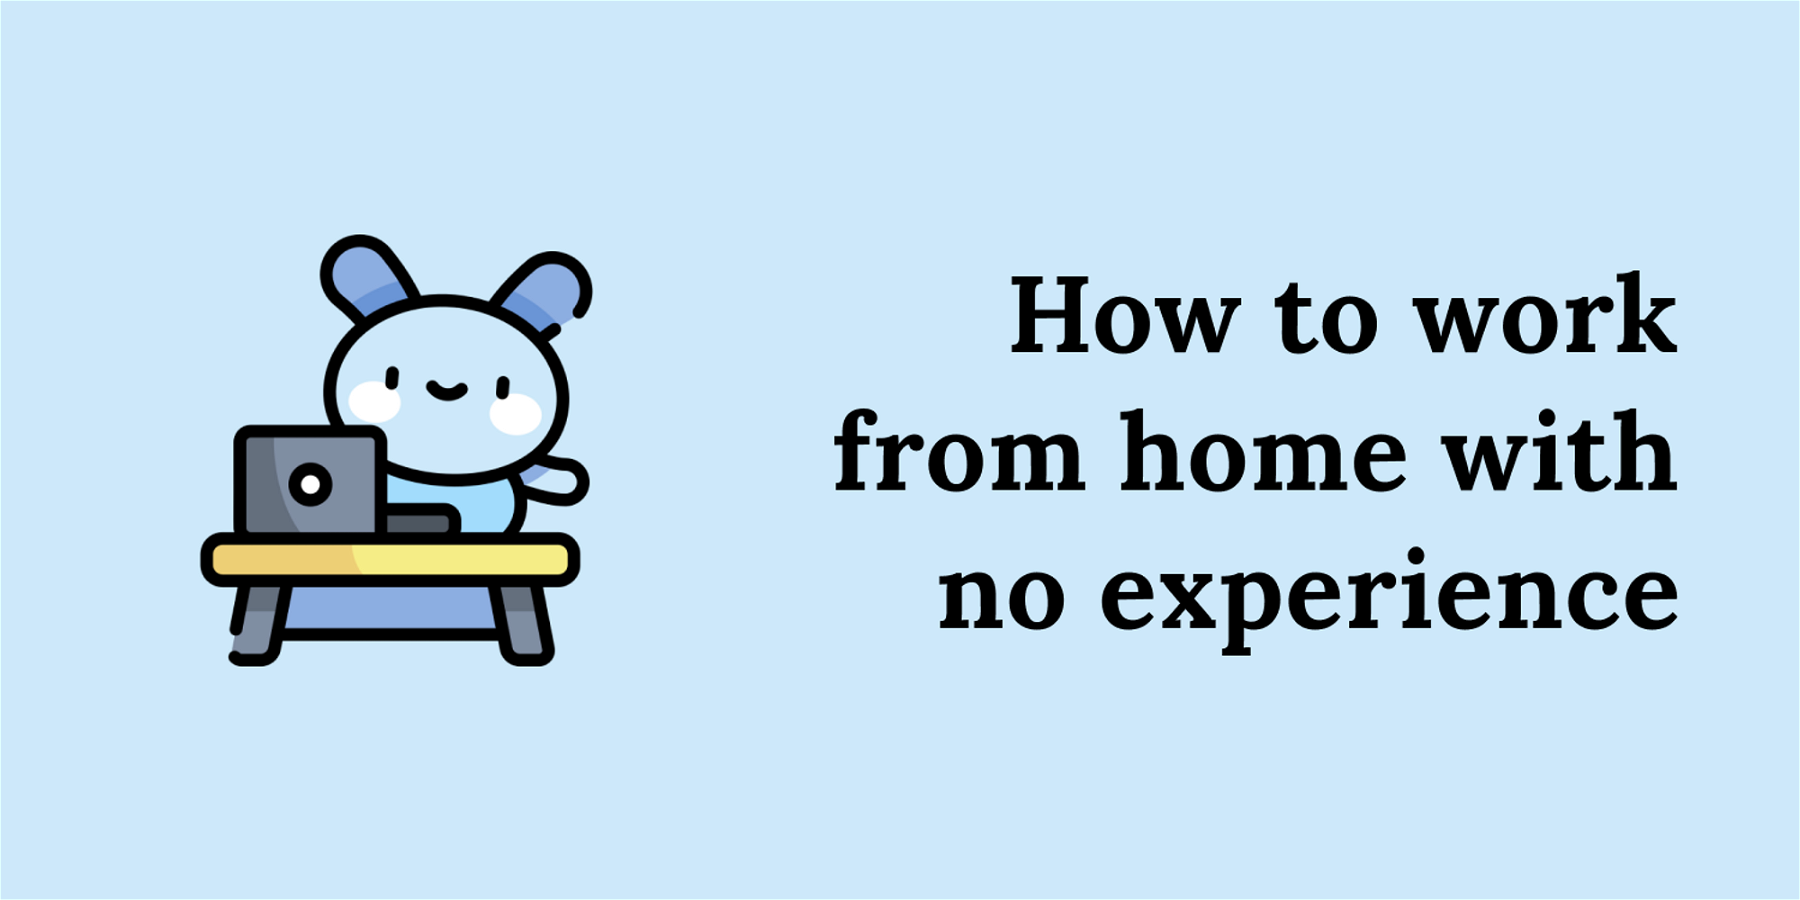 How to work from home with no experience